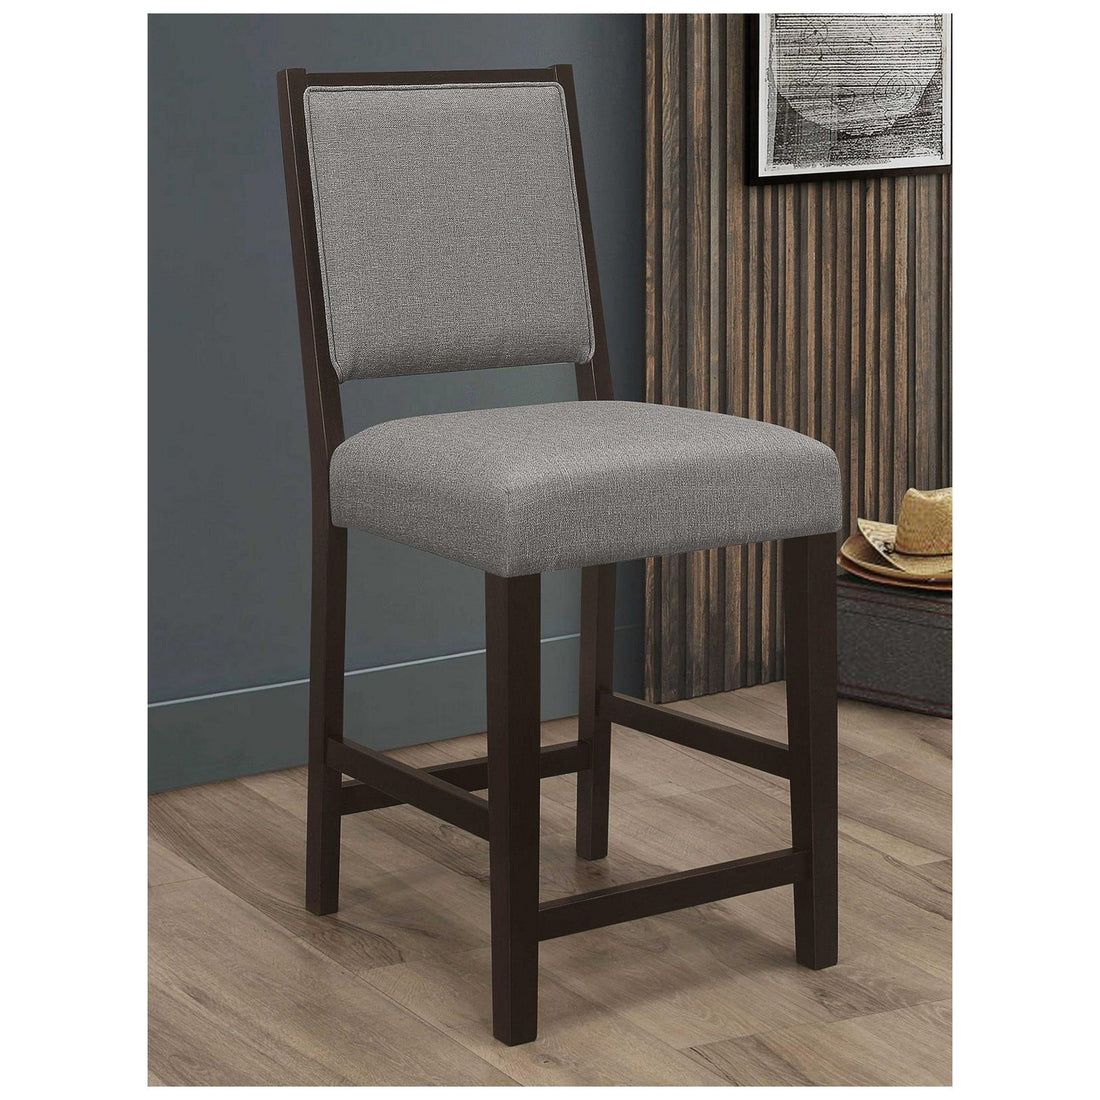 Bedford Upholstered Open Back Counter Height Stools with Footrest (Set of 2) Grey and Espresso 183471